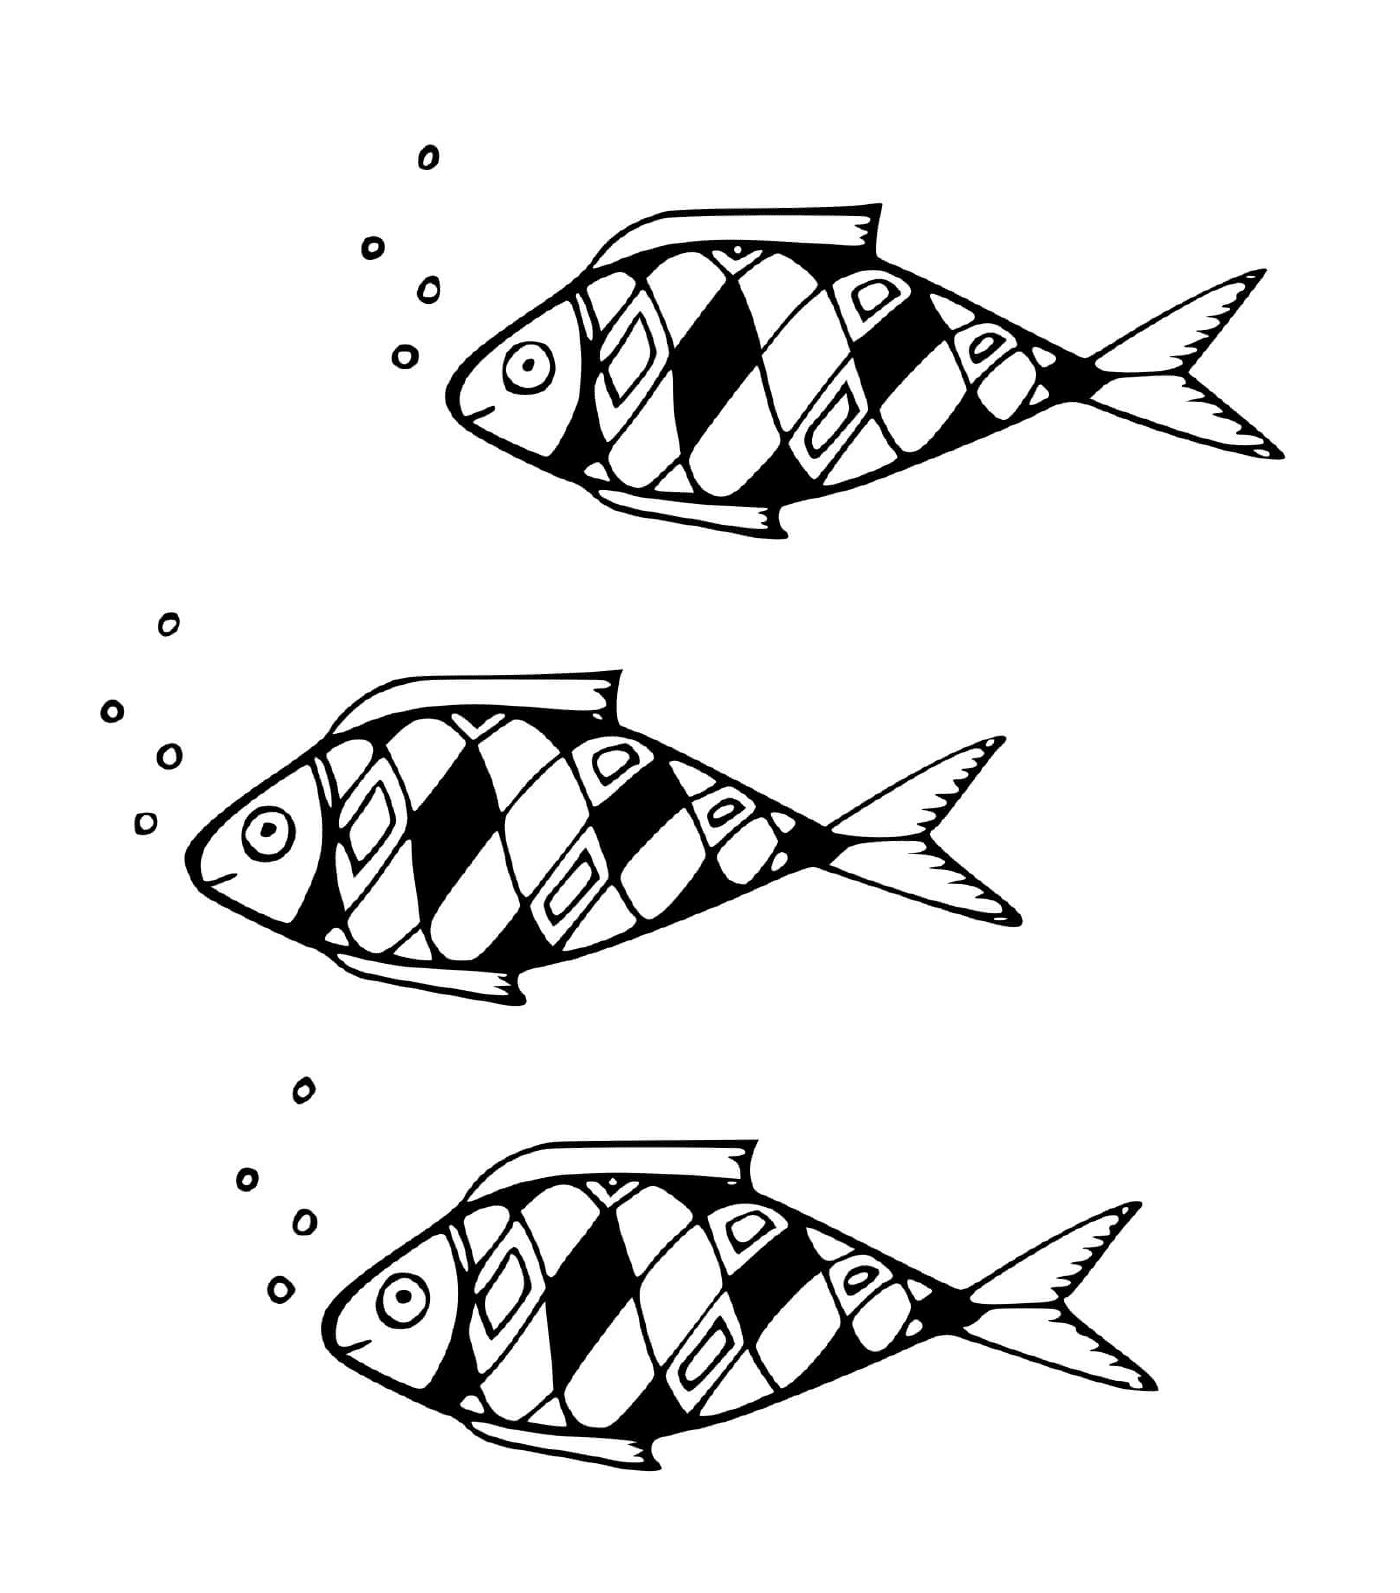 coloriage poisson Acanthomorphes a rayons epineux